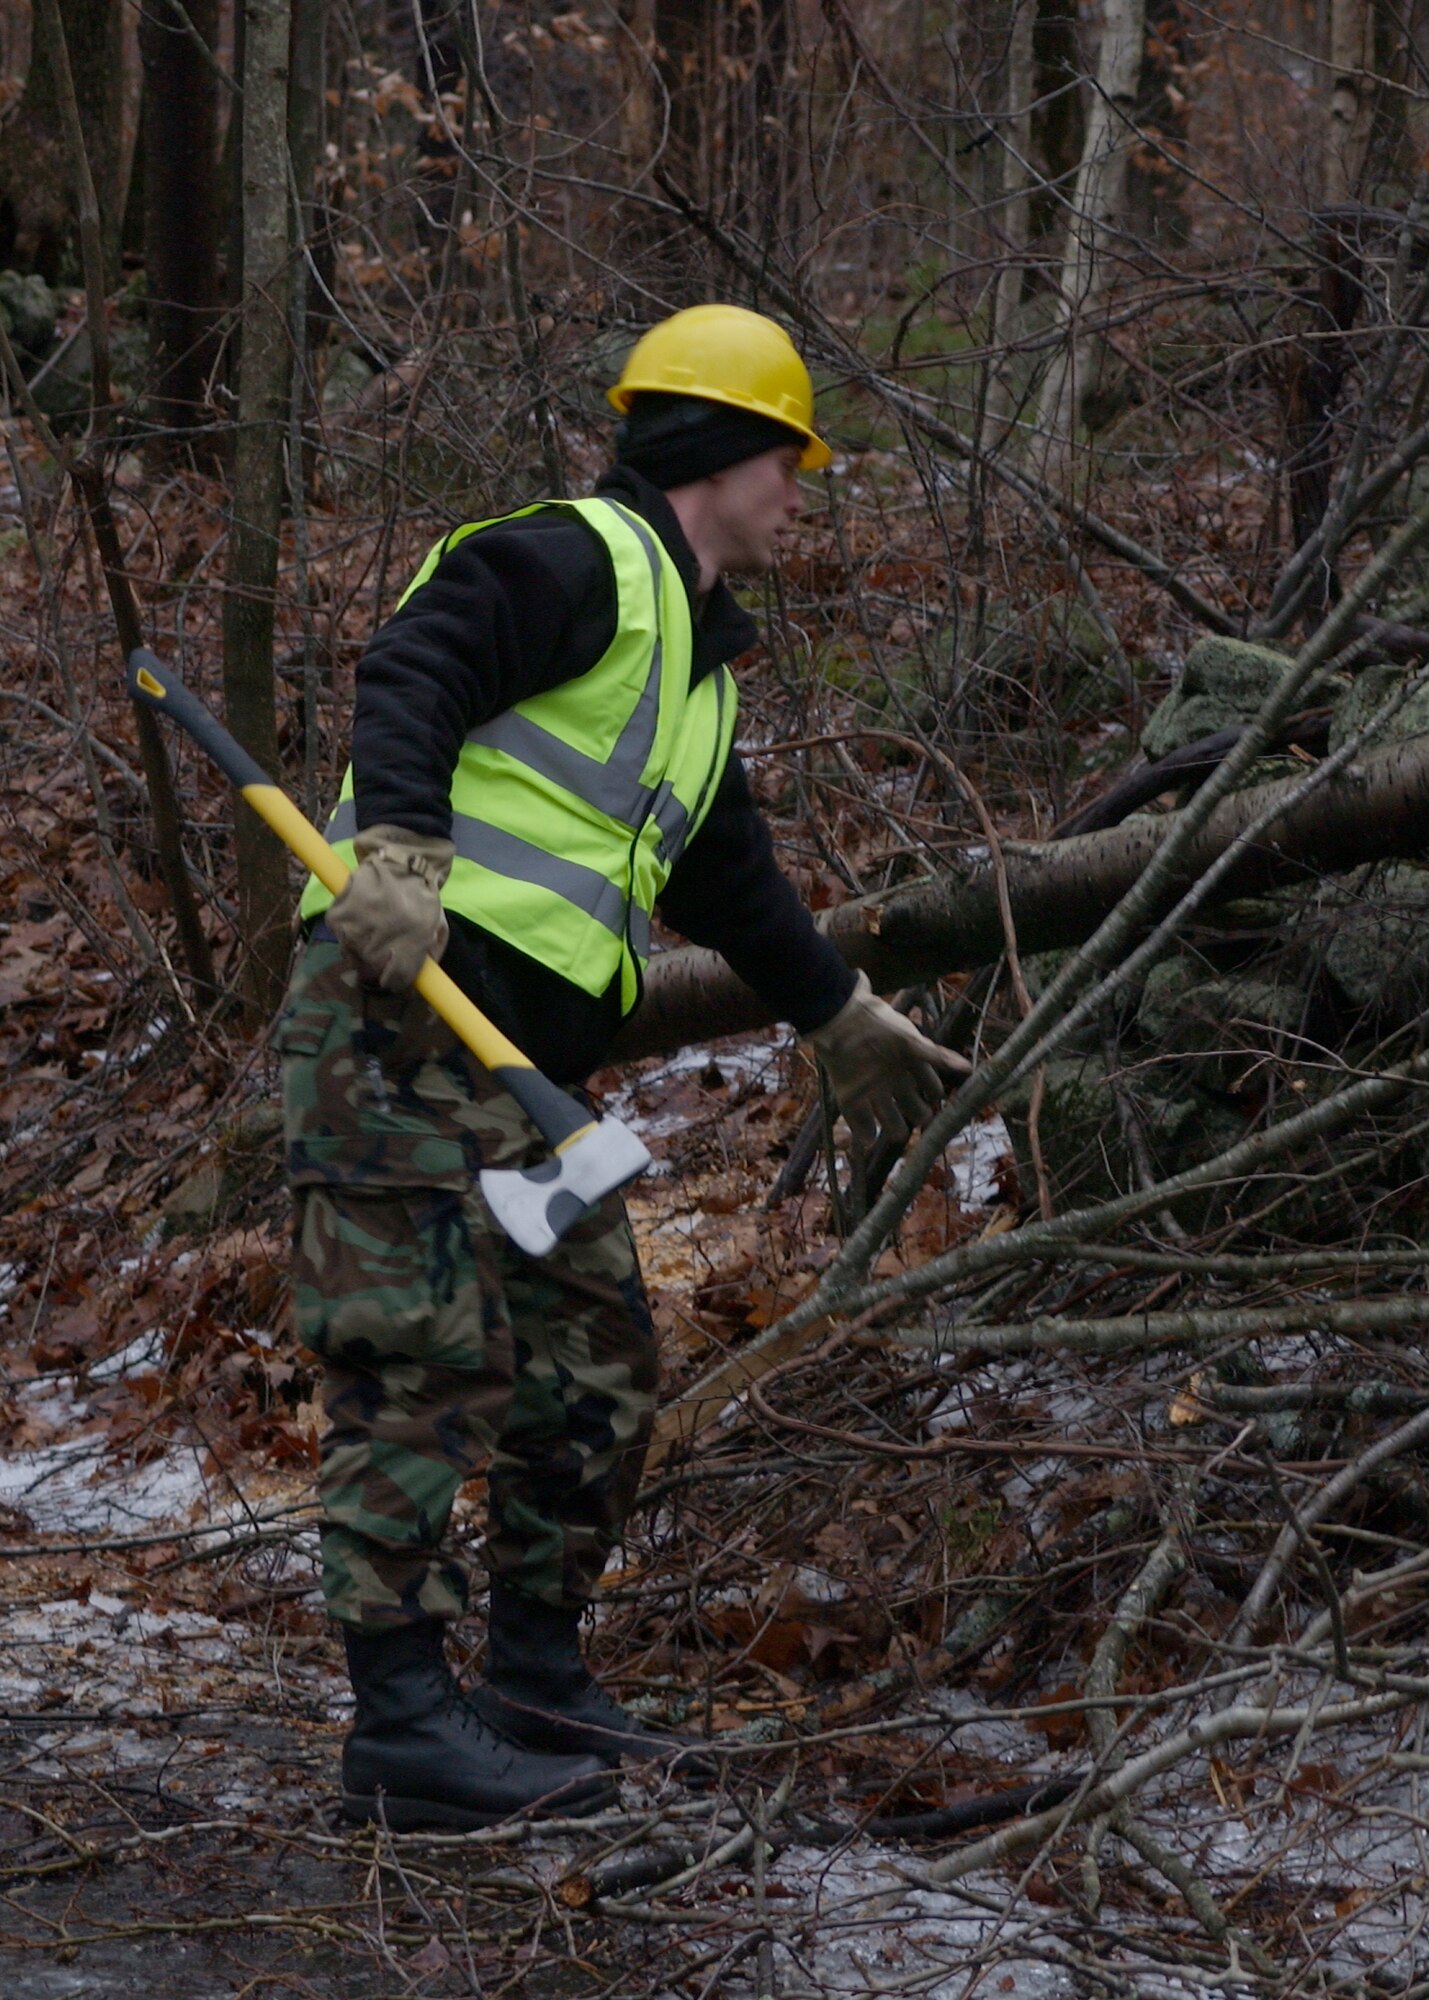 Members of the Mass. Air National Guard deployed 15 December to provide aid to neighboring communities battling from the devastation caused by the December 11th ice storm, which left much of Central and Western Massachusetts without power.